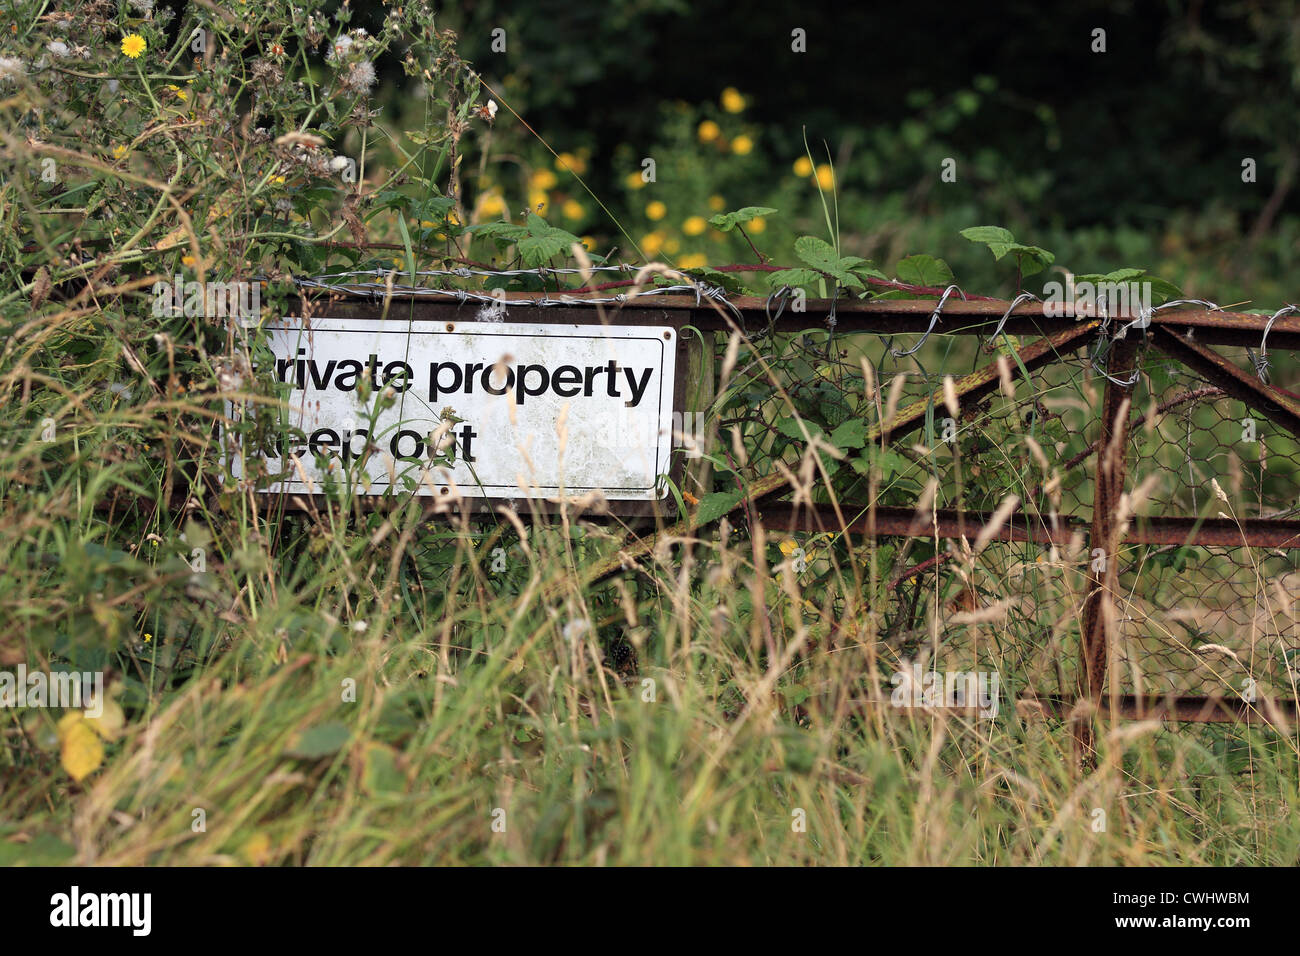 A 'keep out' sign fixed to a metal gate in overgrown vegetation Stock Photo